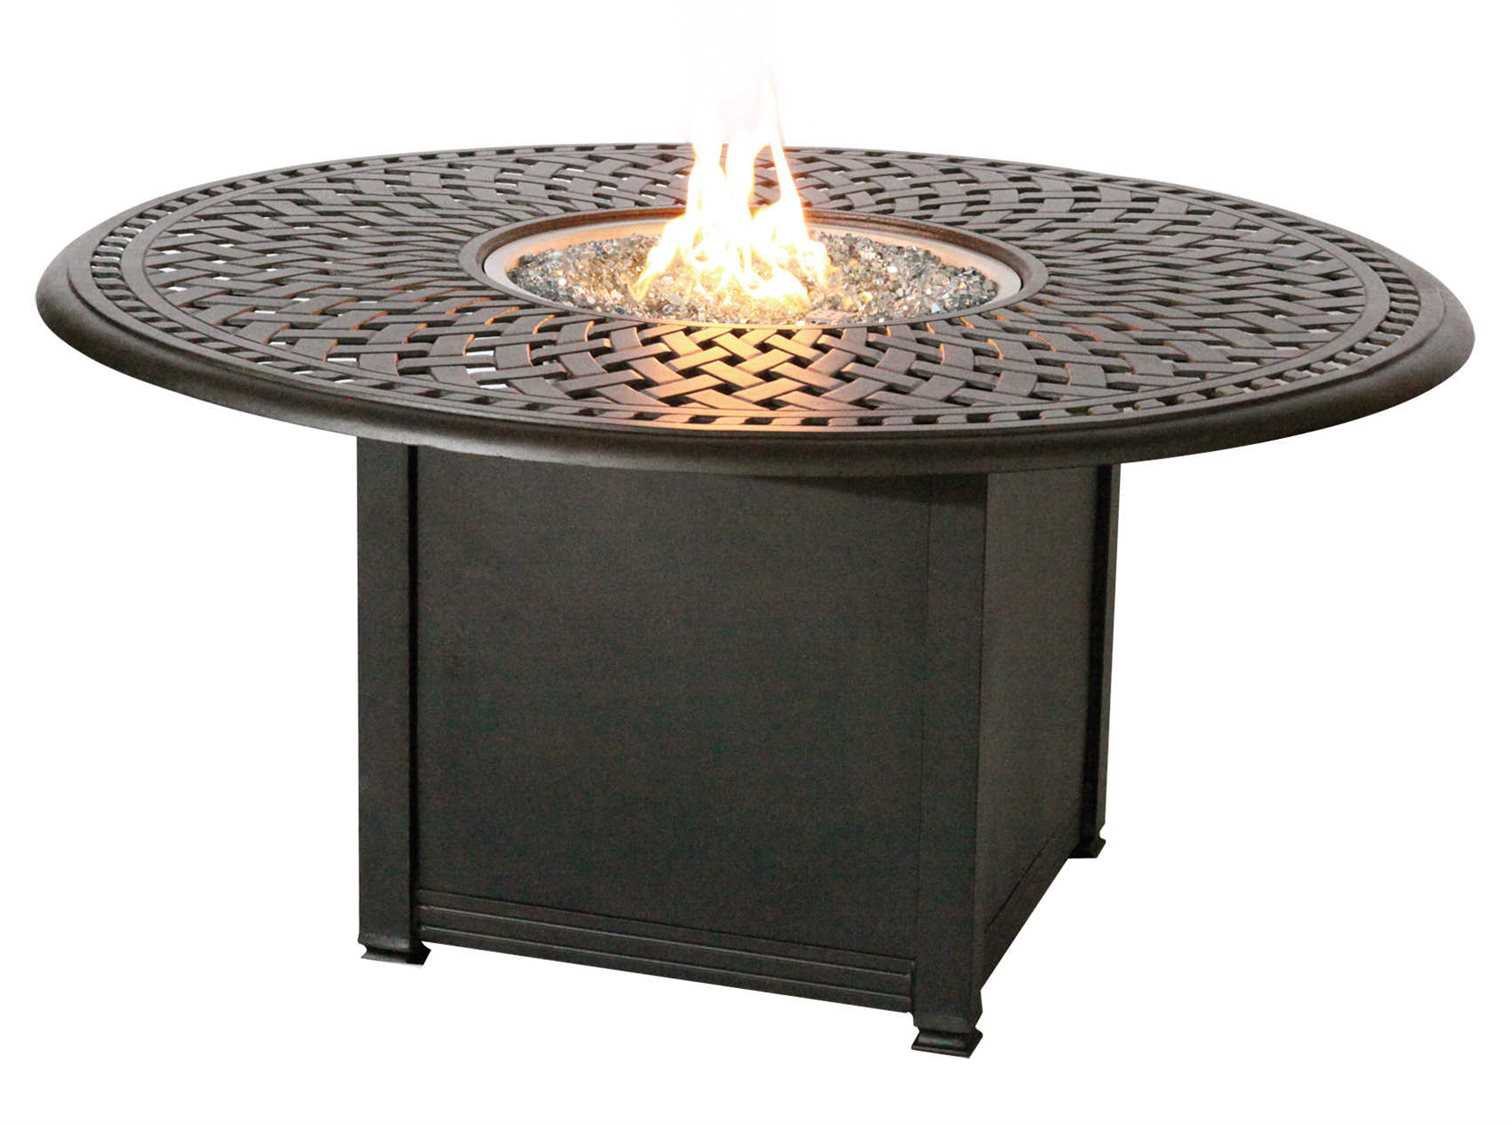 Darlee Outdoor Living Series 60 Antique, Cast Aluminum Gas Fire Pit Table